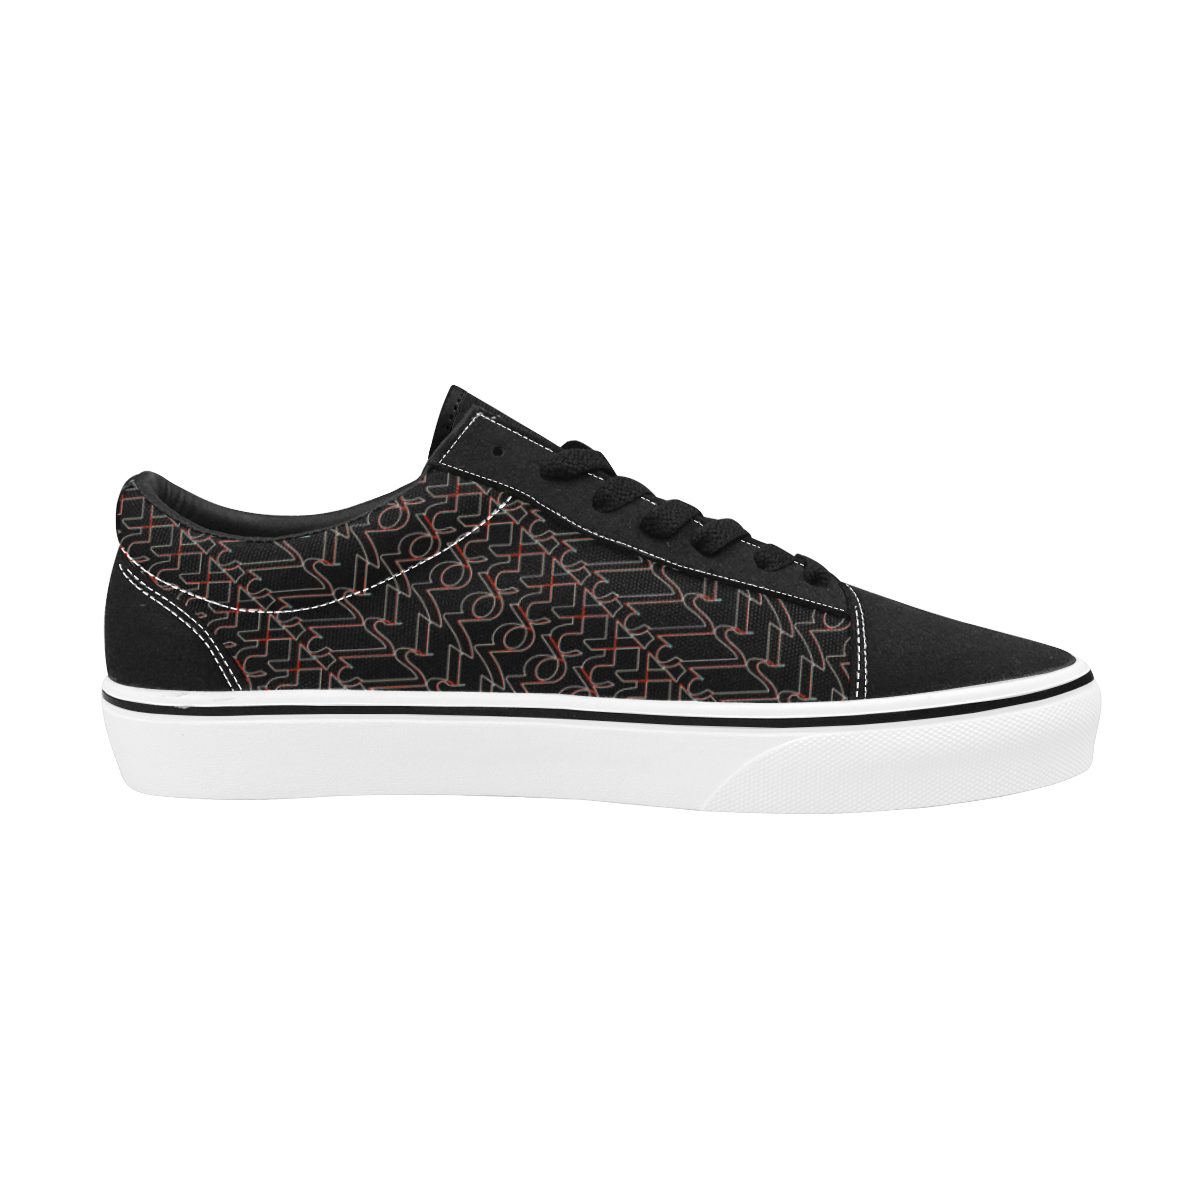 NUMBERS Collection 1234567 Black/Red/White Men's Low Top Skateboarding Shoes (Model E001-2)